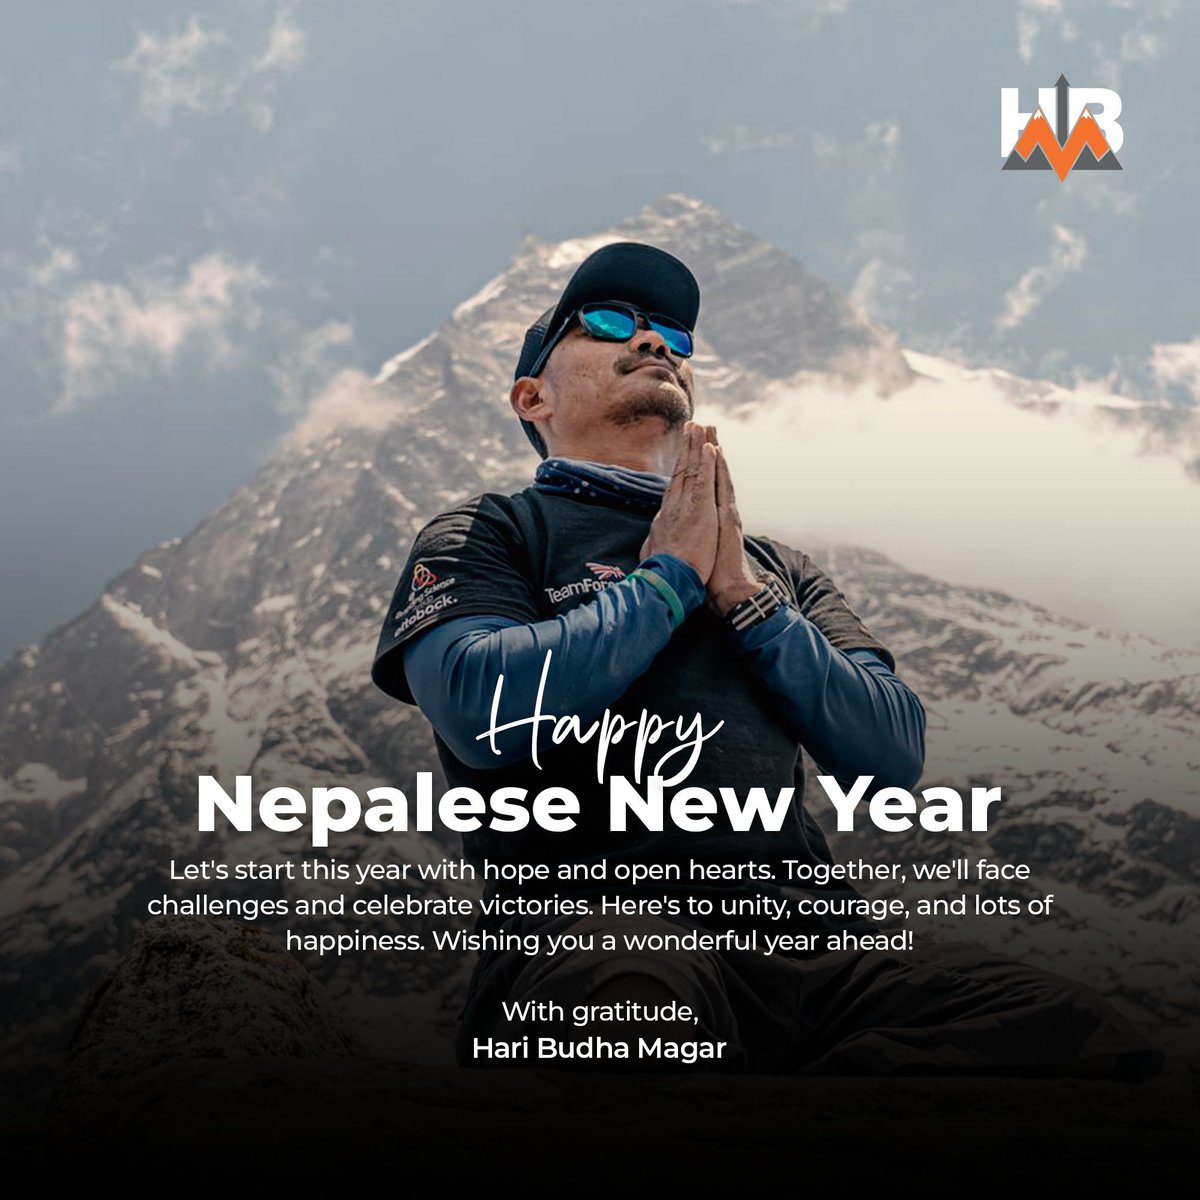 Happy Nepalese New Year 2081 B. S. to you all 🙏🏼
. 
.
.
#NewYear #HappyNewYear #2081BS